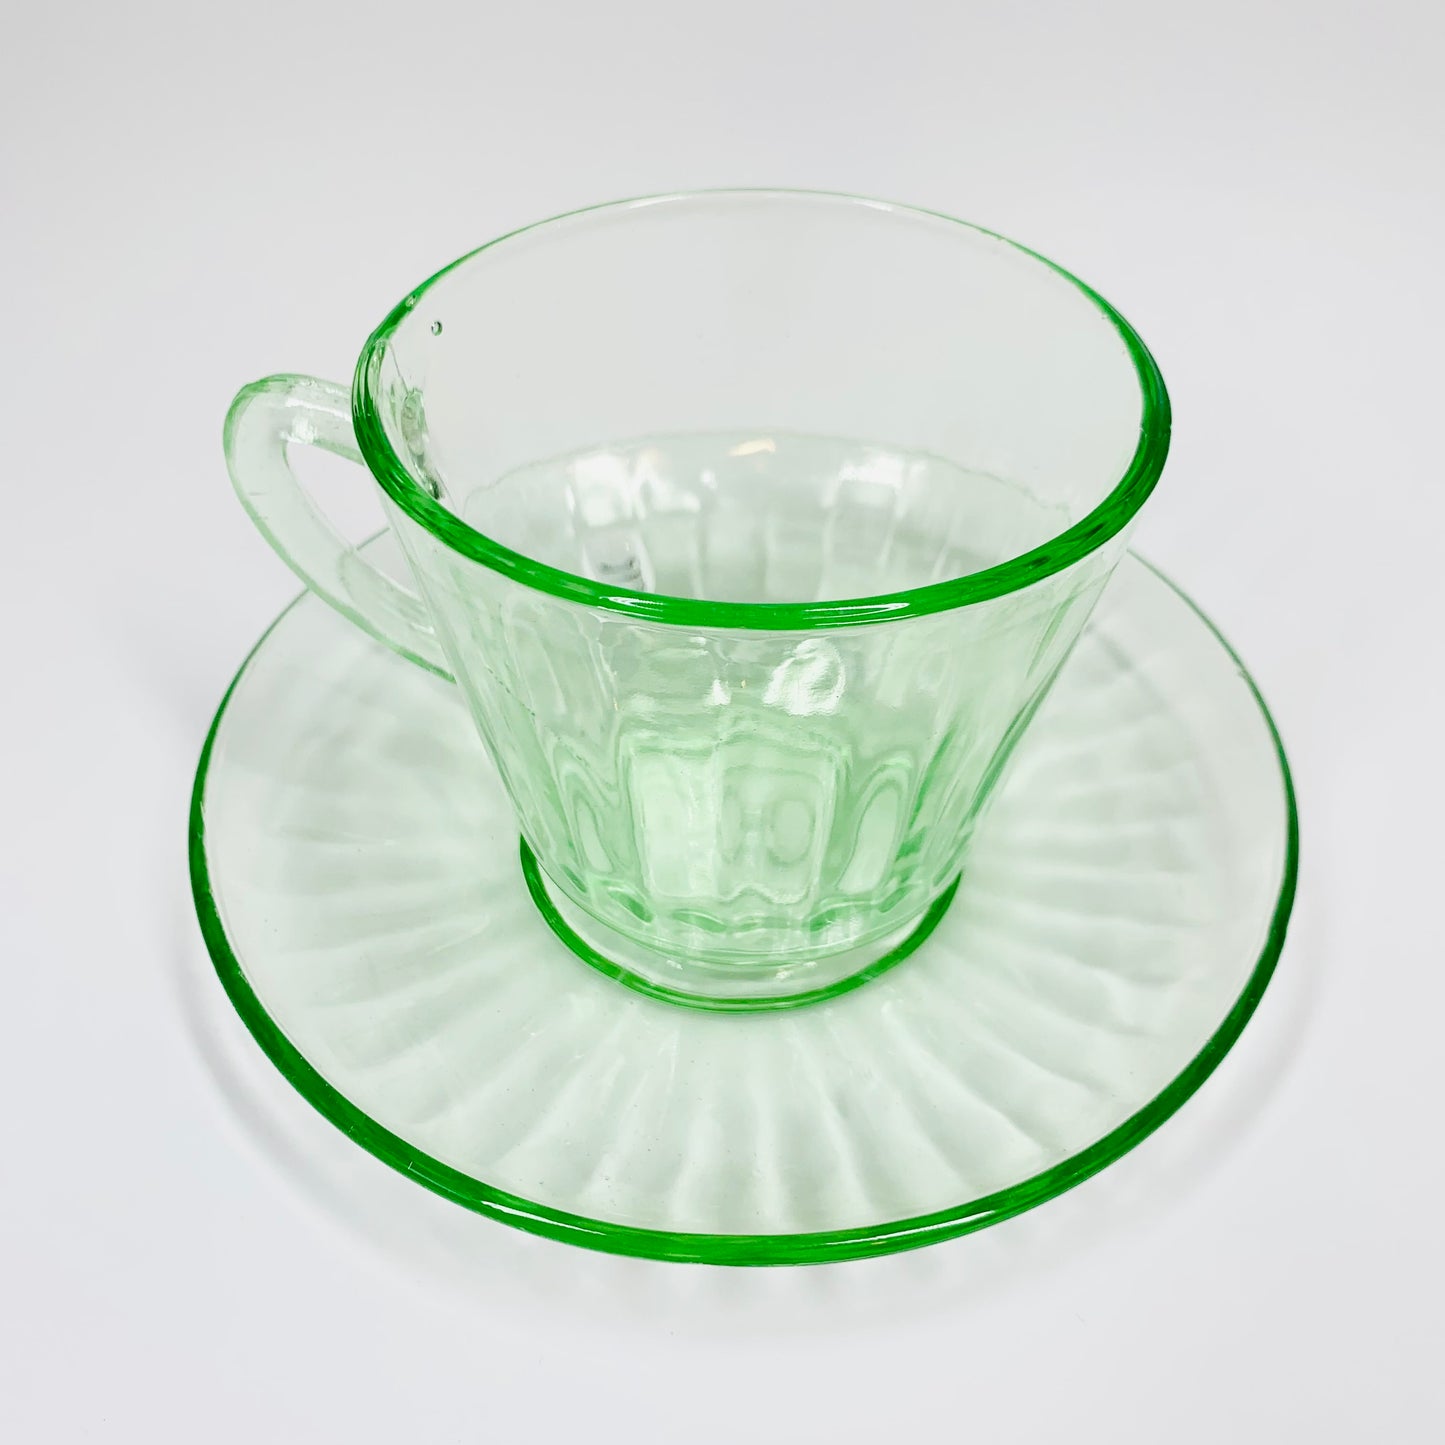 Extremely rare antique Art Deco green glass tea cup and matching saucer